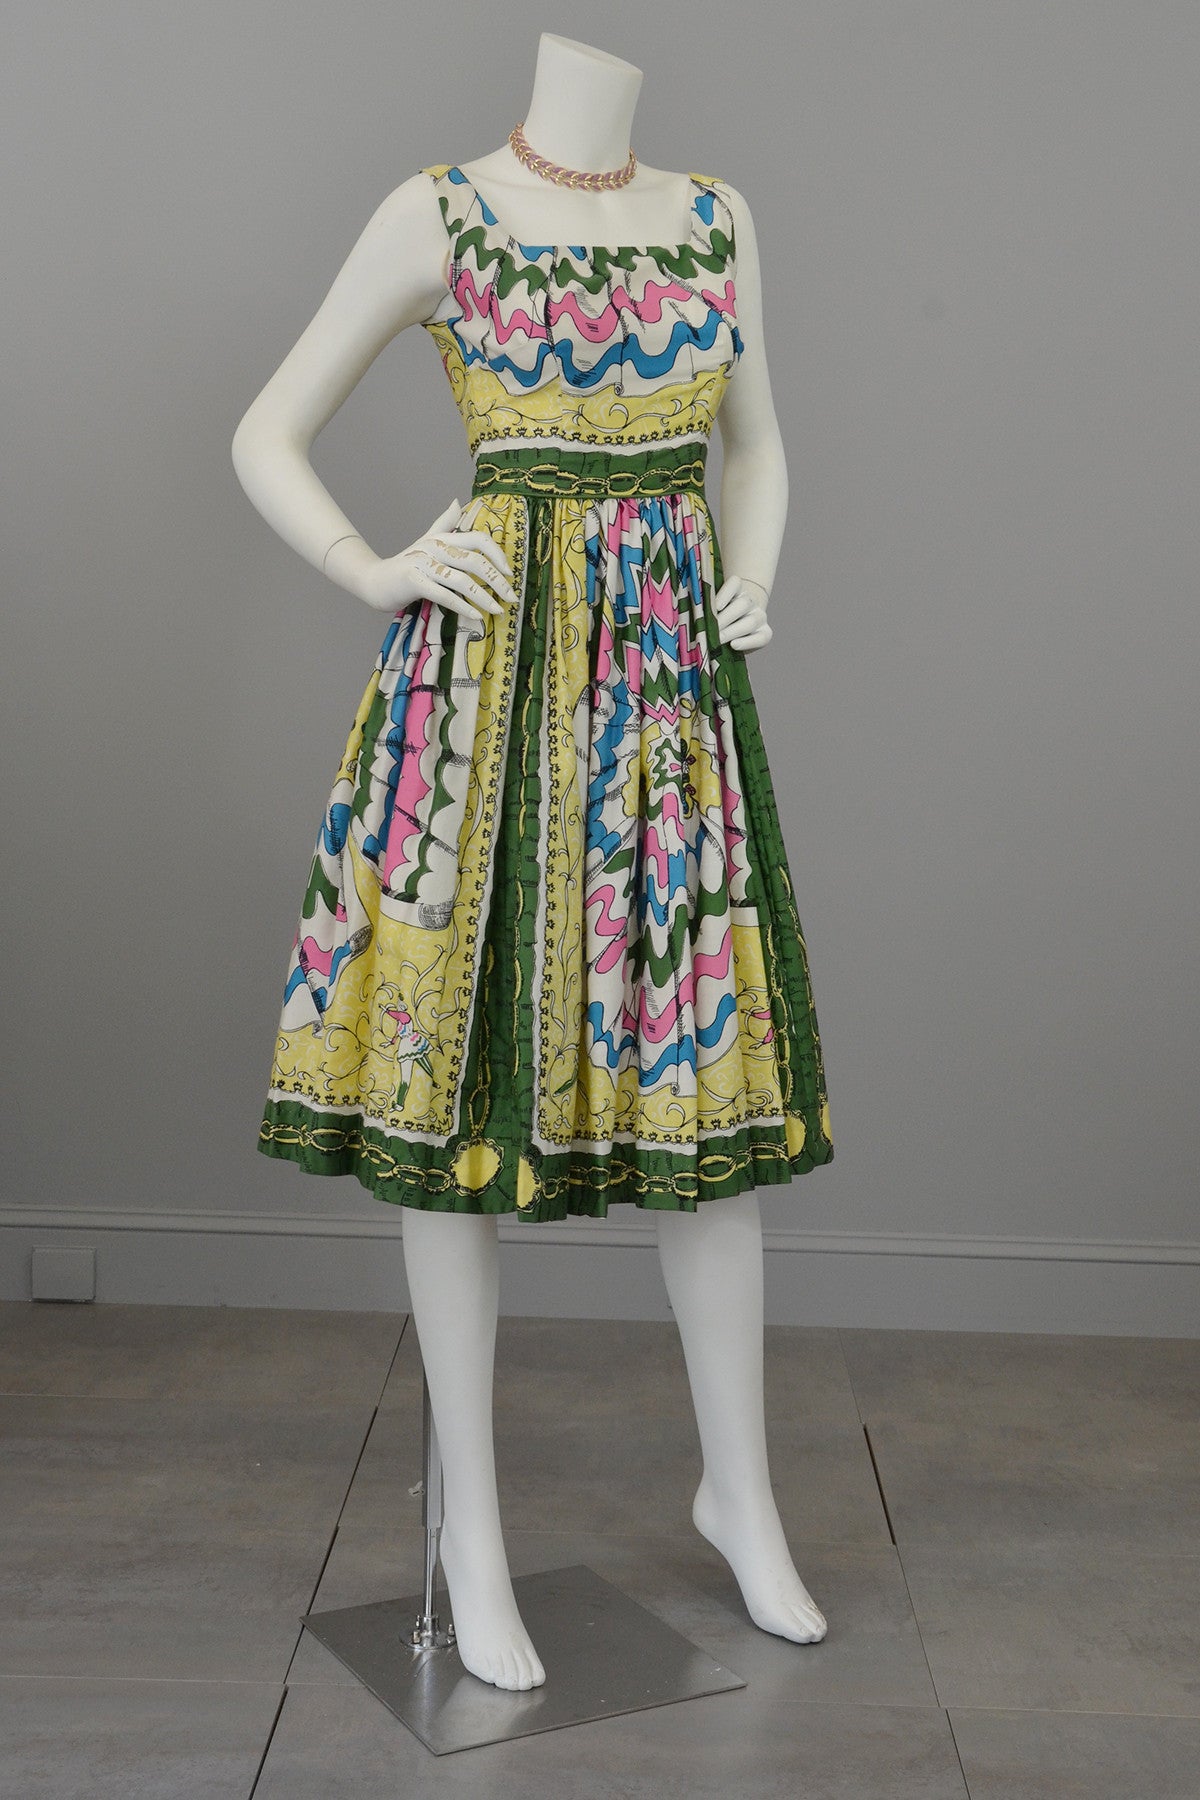 1950s Novelty Print Vintage Dress with Dancing Jesters